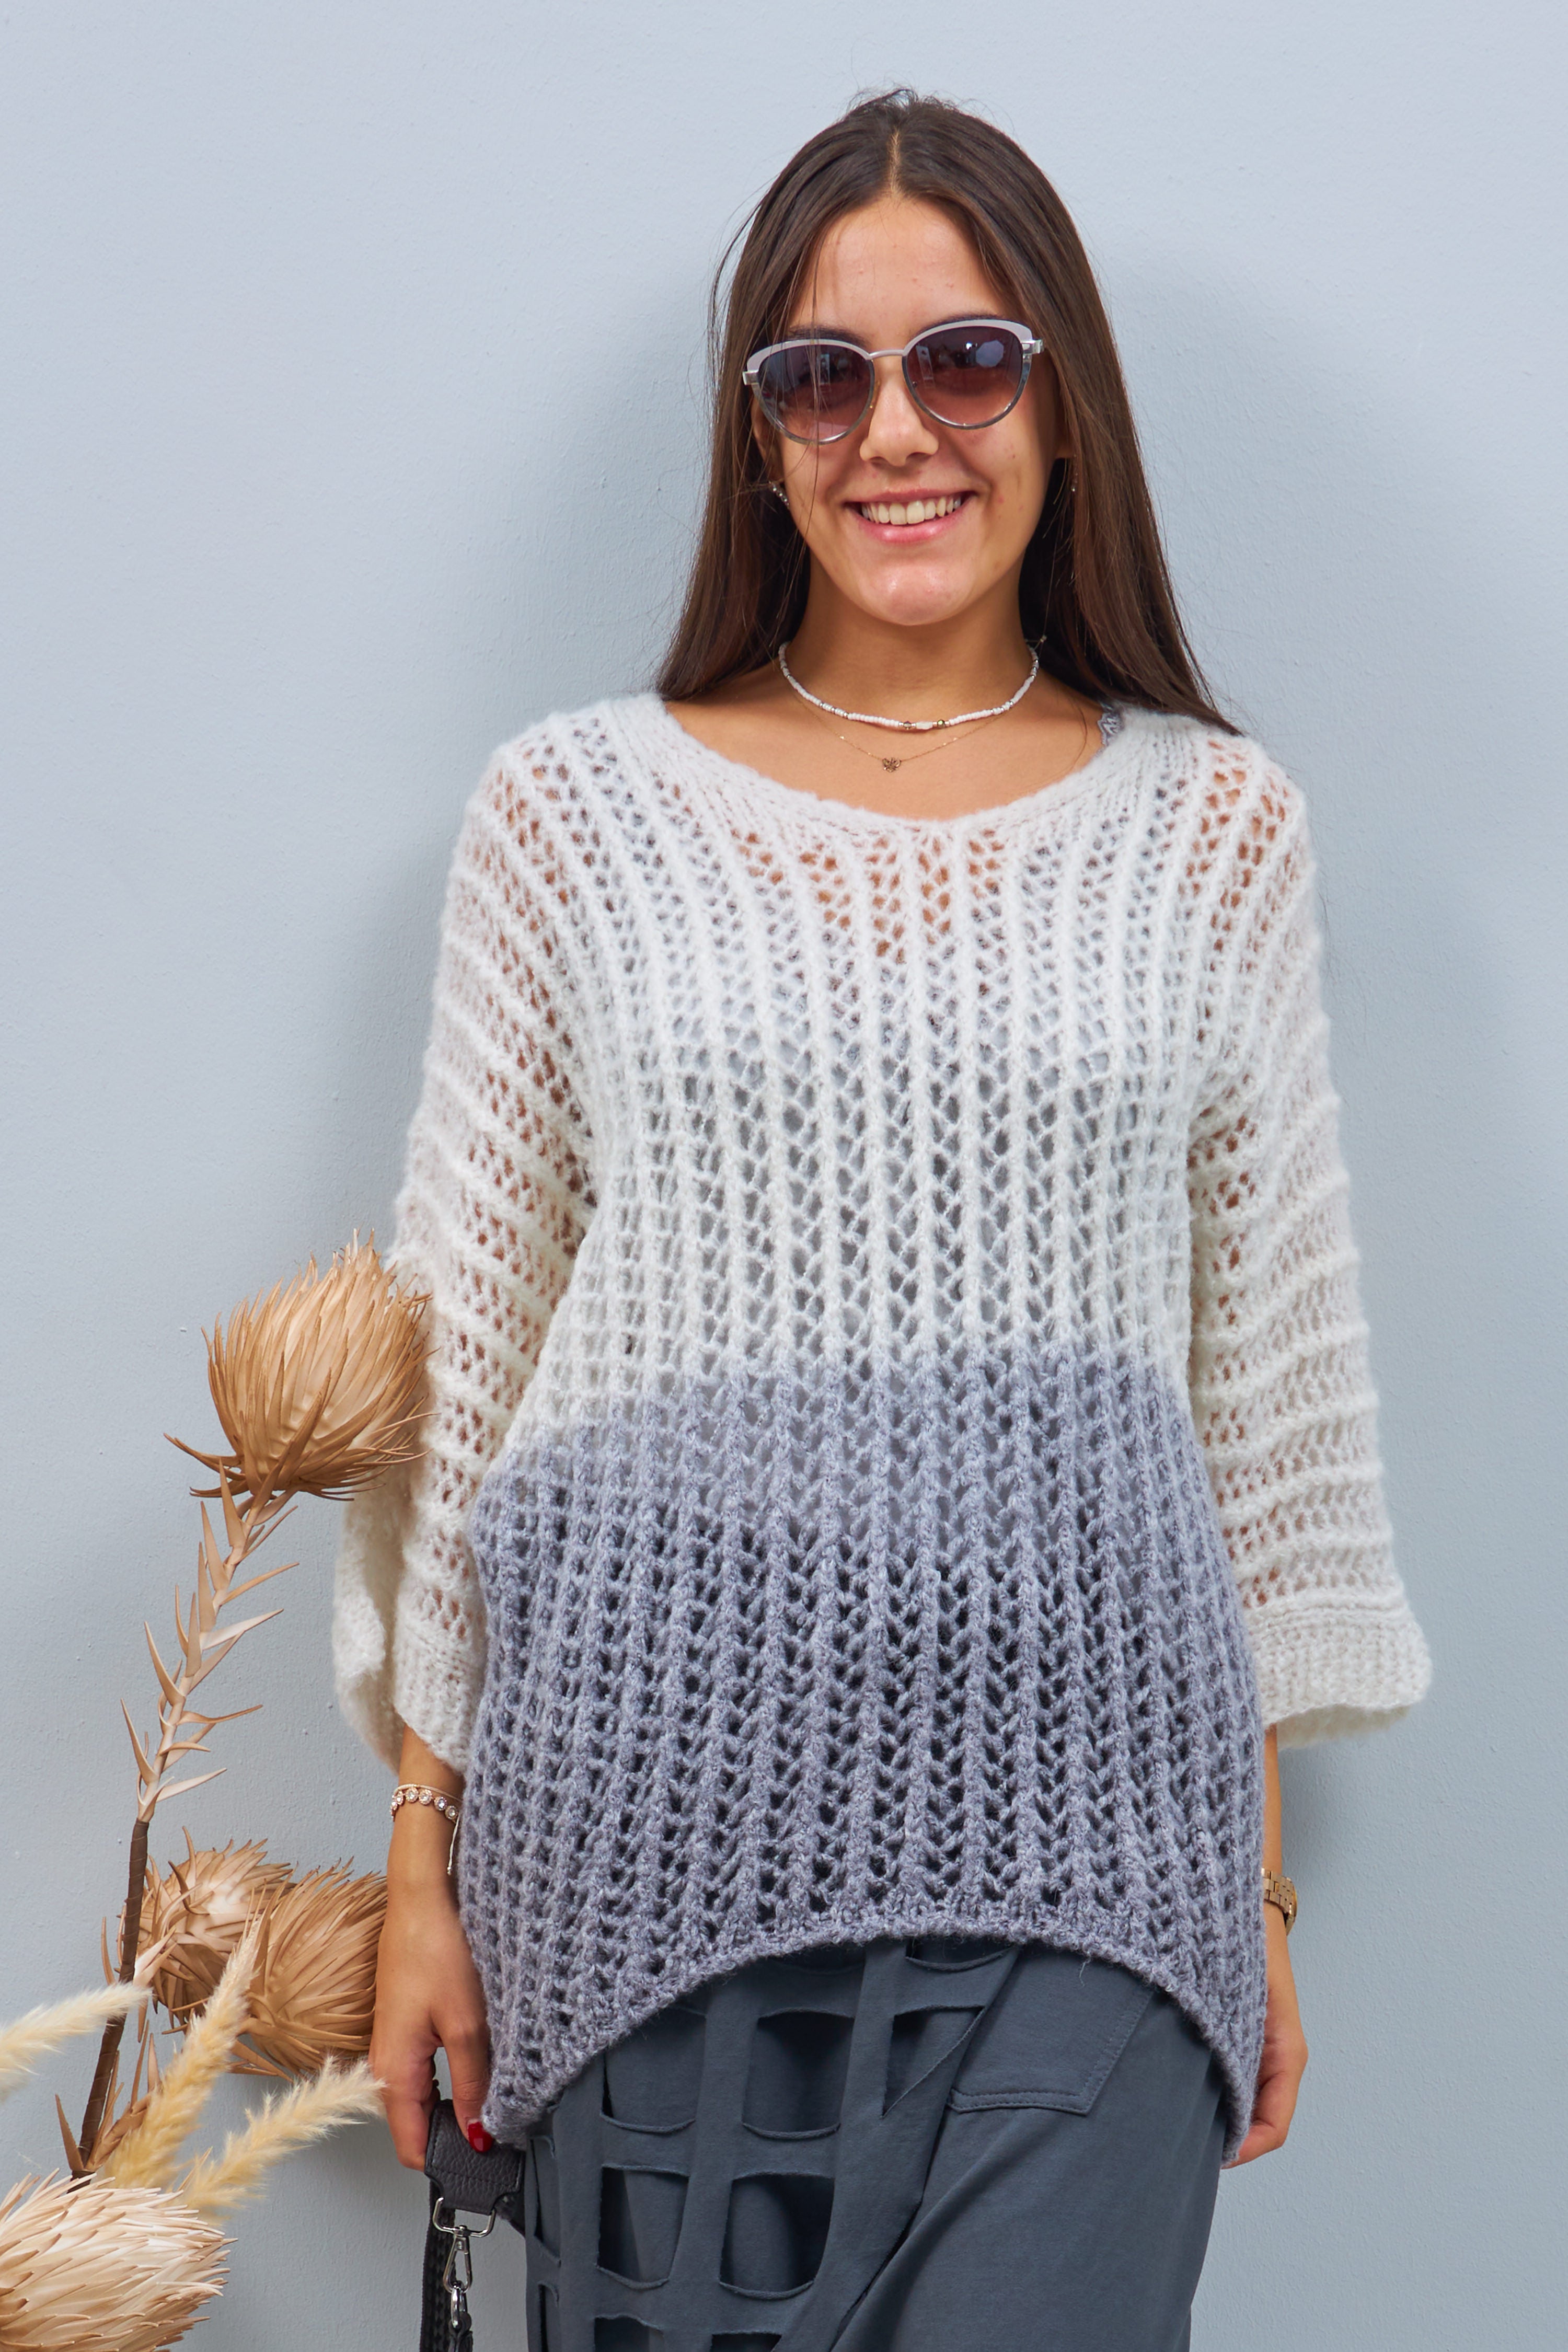 Knit sweater with color gradient, offwhite-grey